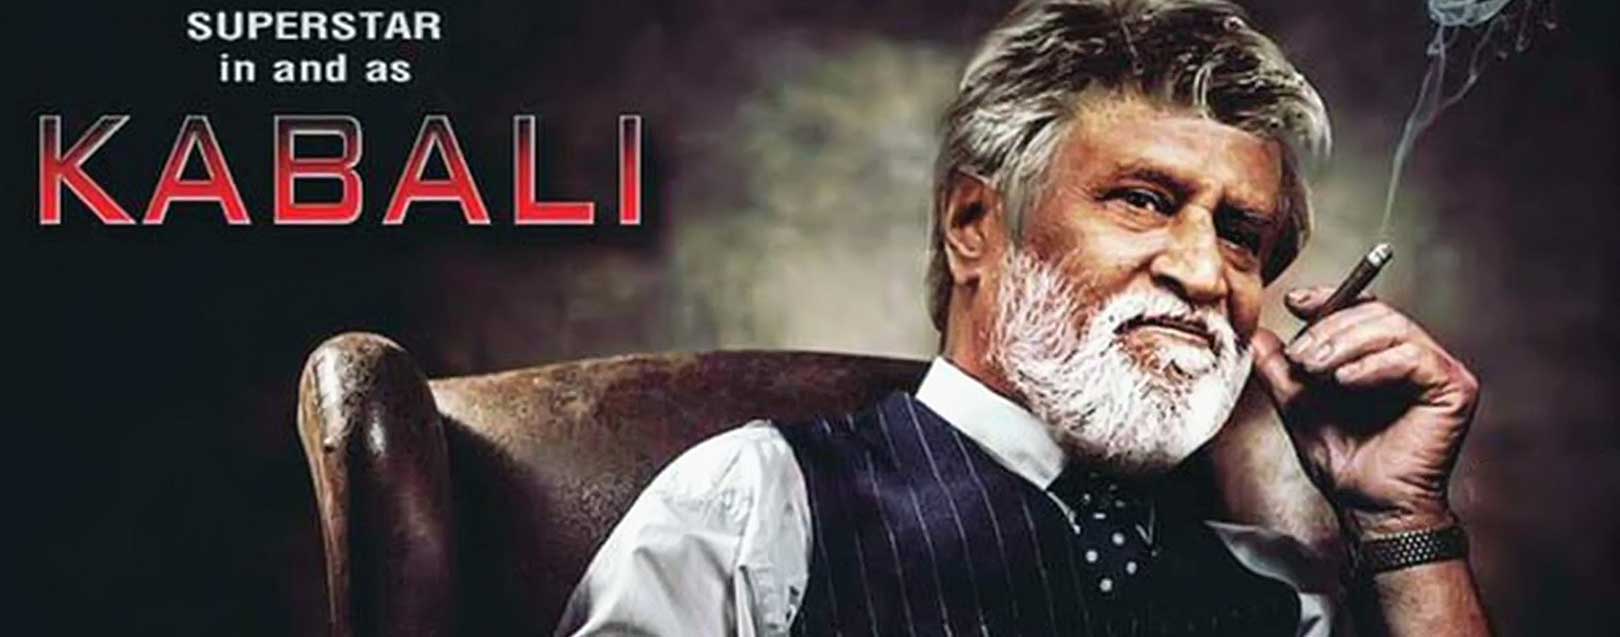 The special number that Kabali should target